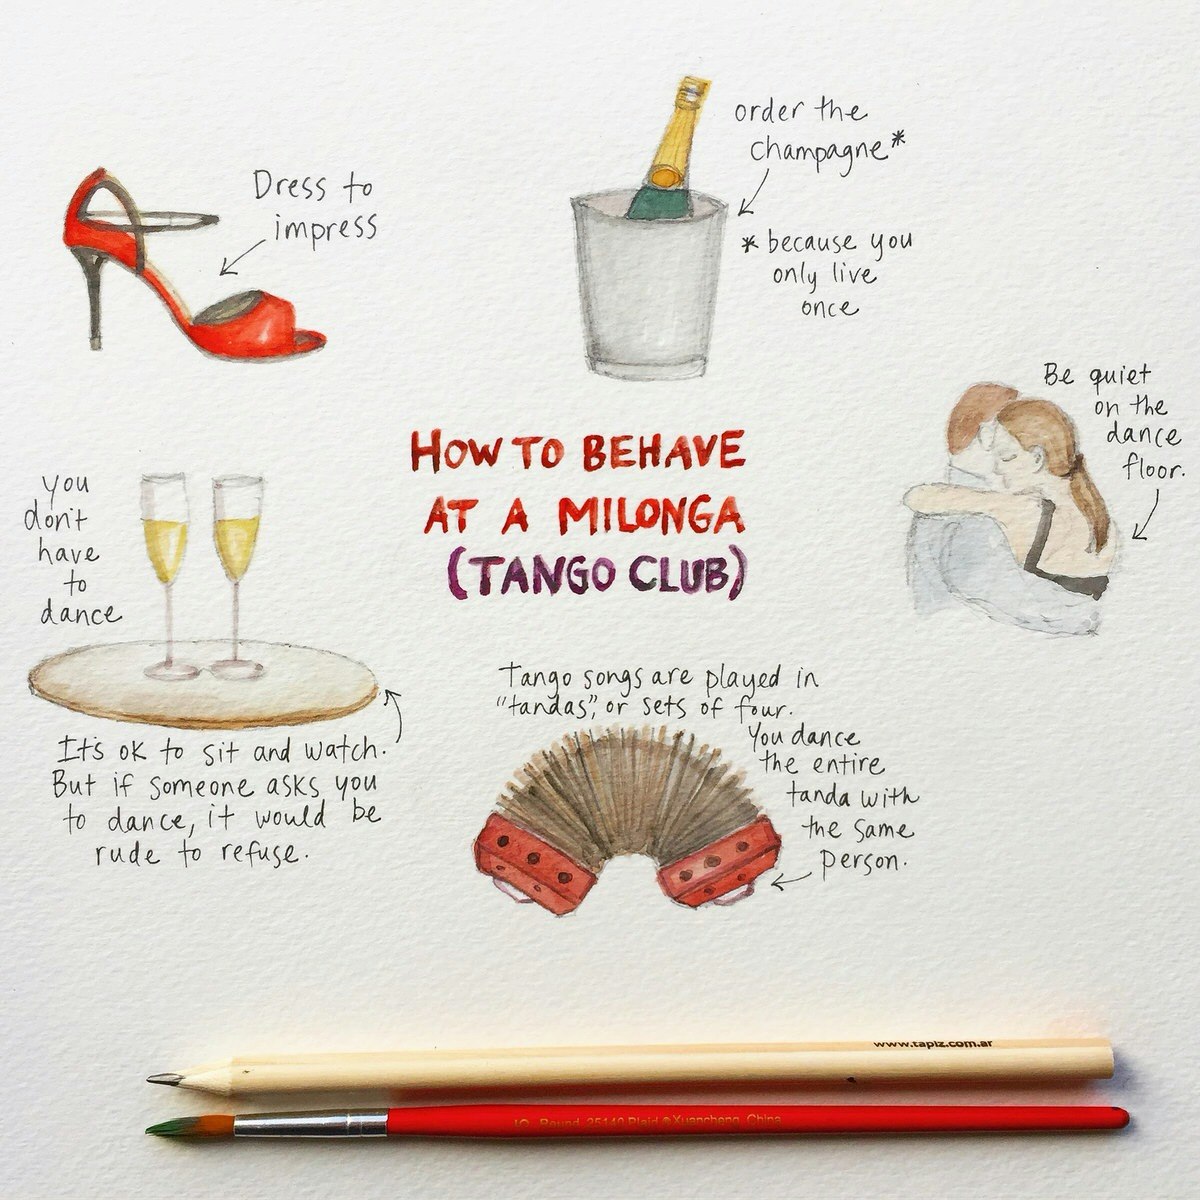 The writer's sketch of how to behave at a milonga